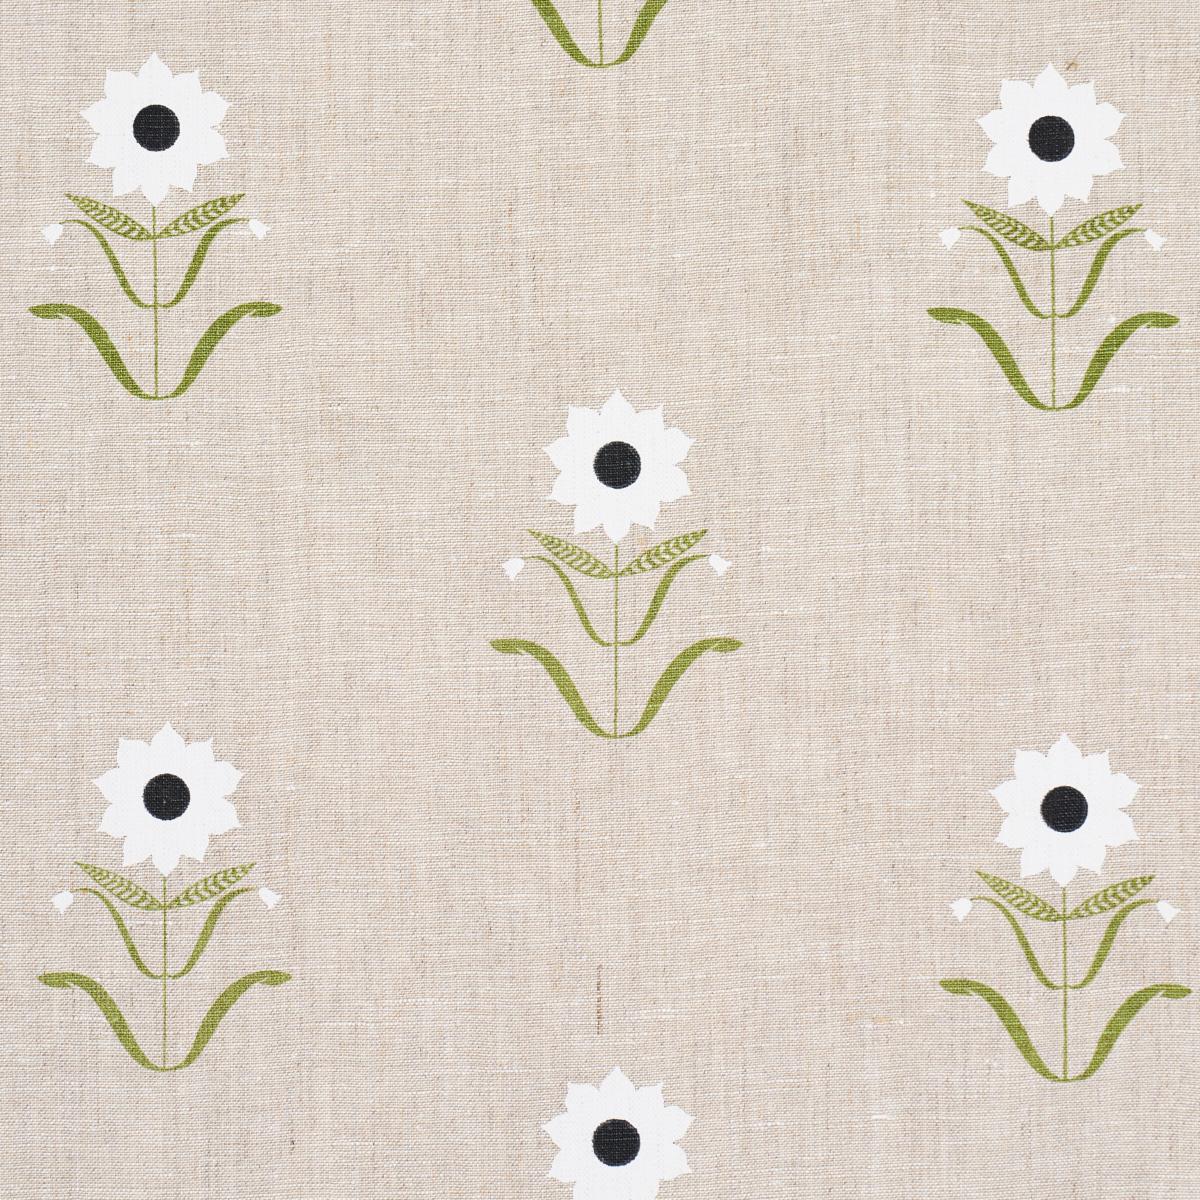 FORGET ME NOTS_WHITE ON LINEN